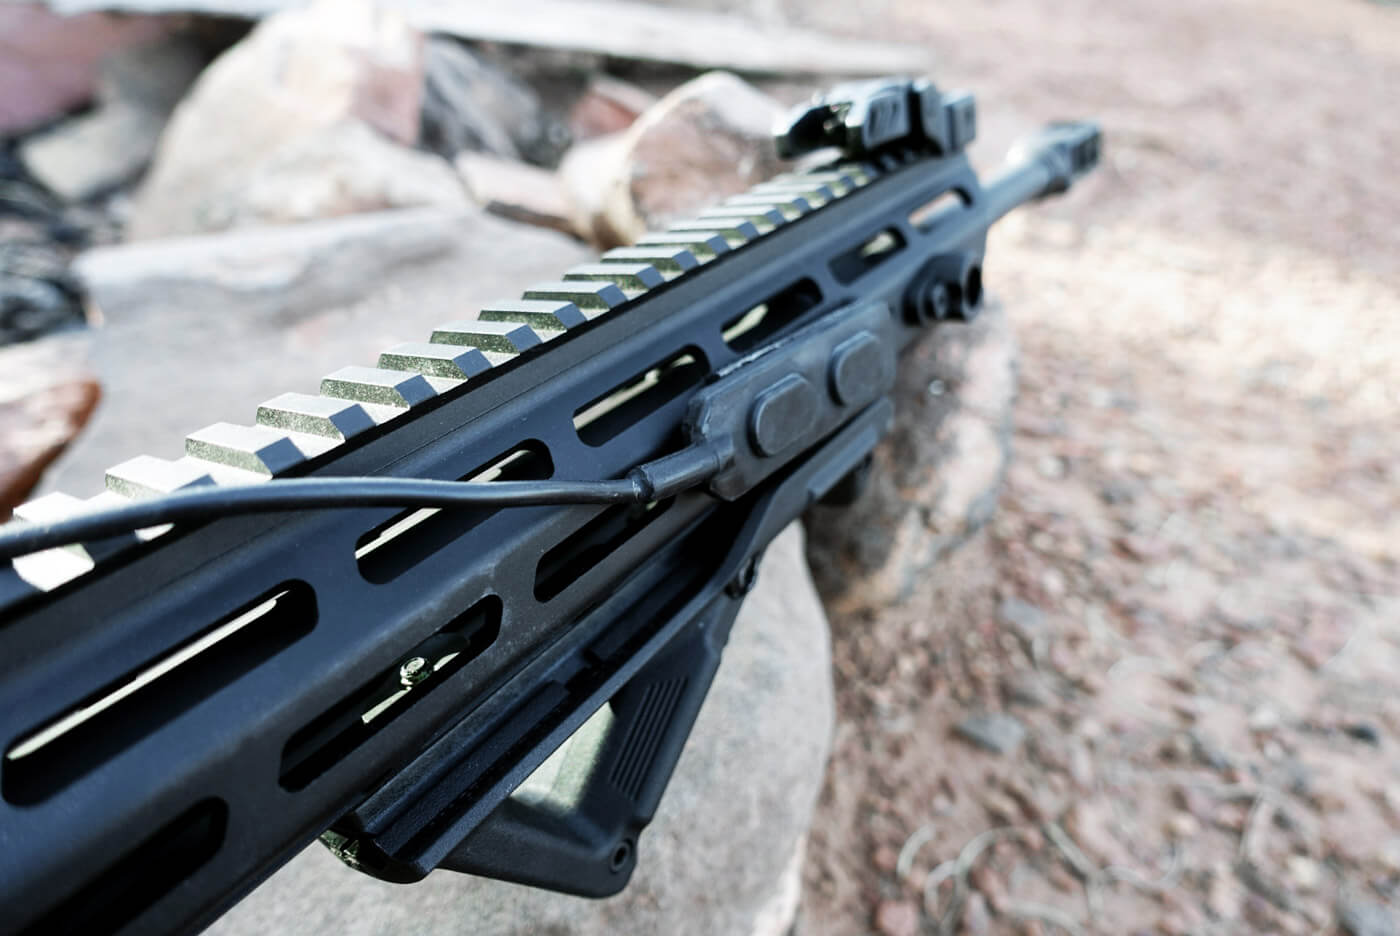 In this photograph we see how the author used the Magpul M-LOK attachment points on the side of the handguard.